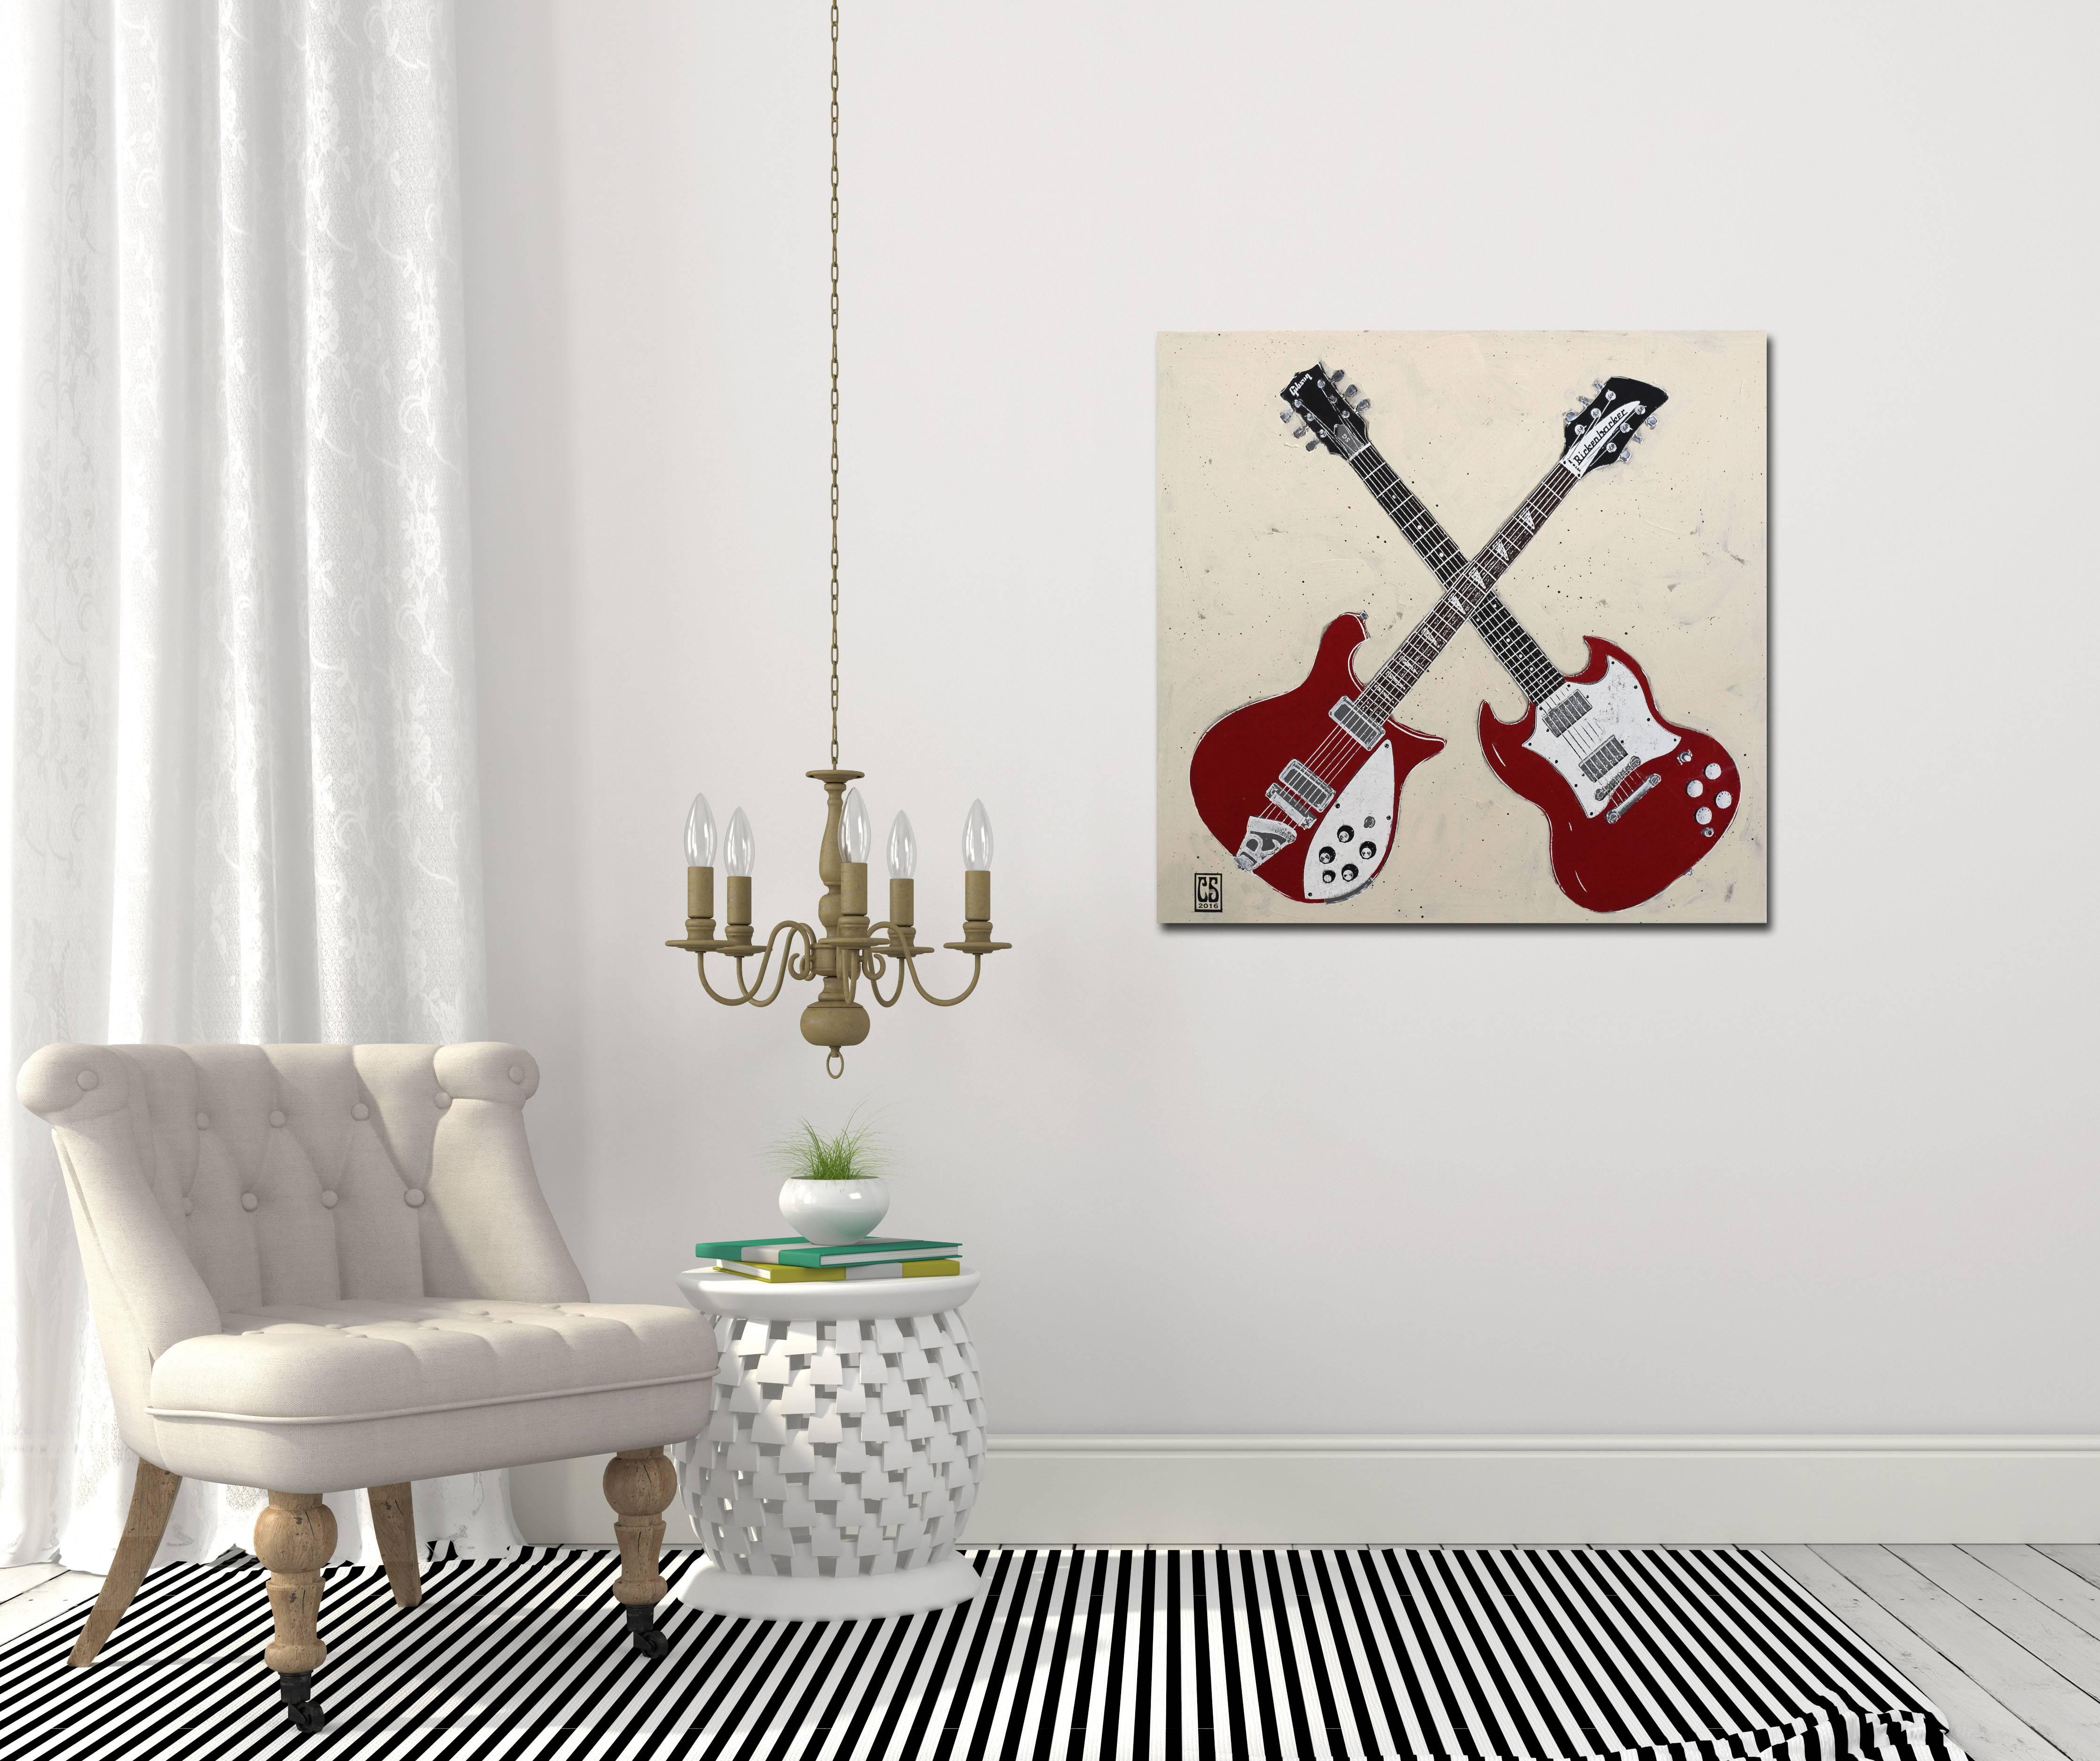 Double Trouble - Two Red Guitars Original Music Instrument Painting on Canvas - White Still-Life Painting by Carl Smith